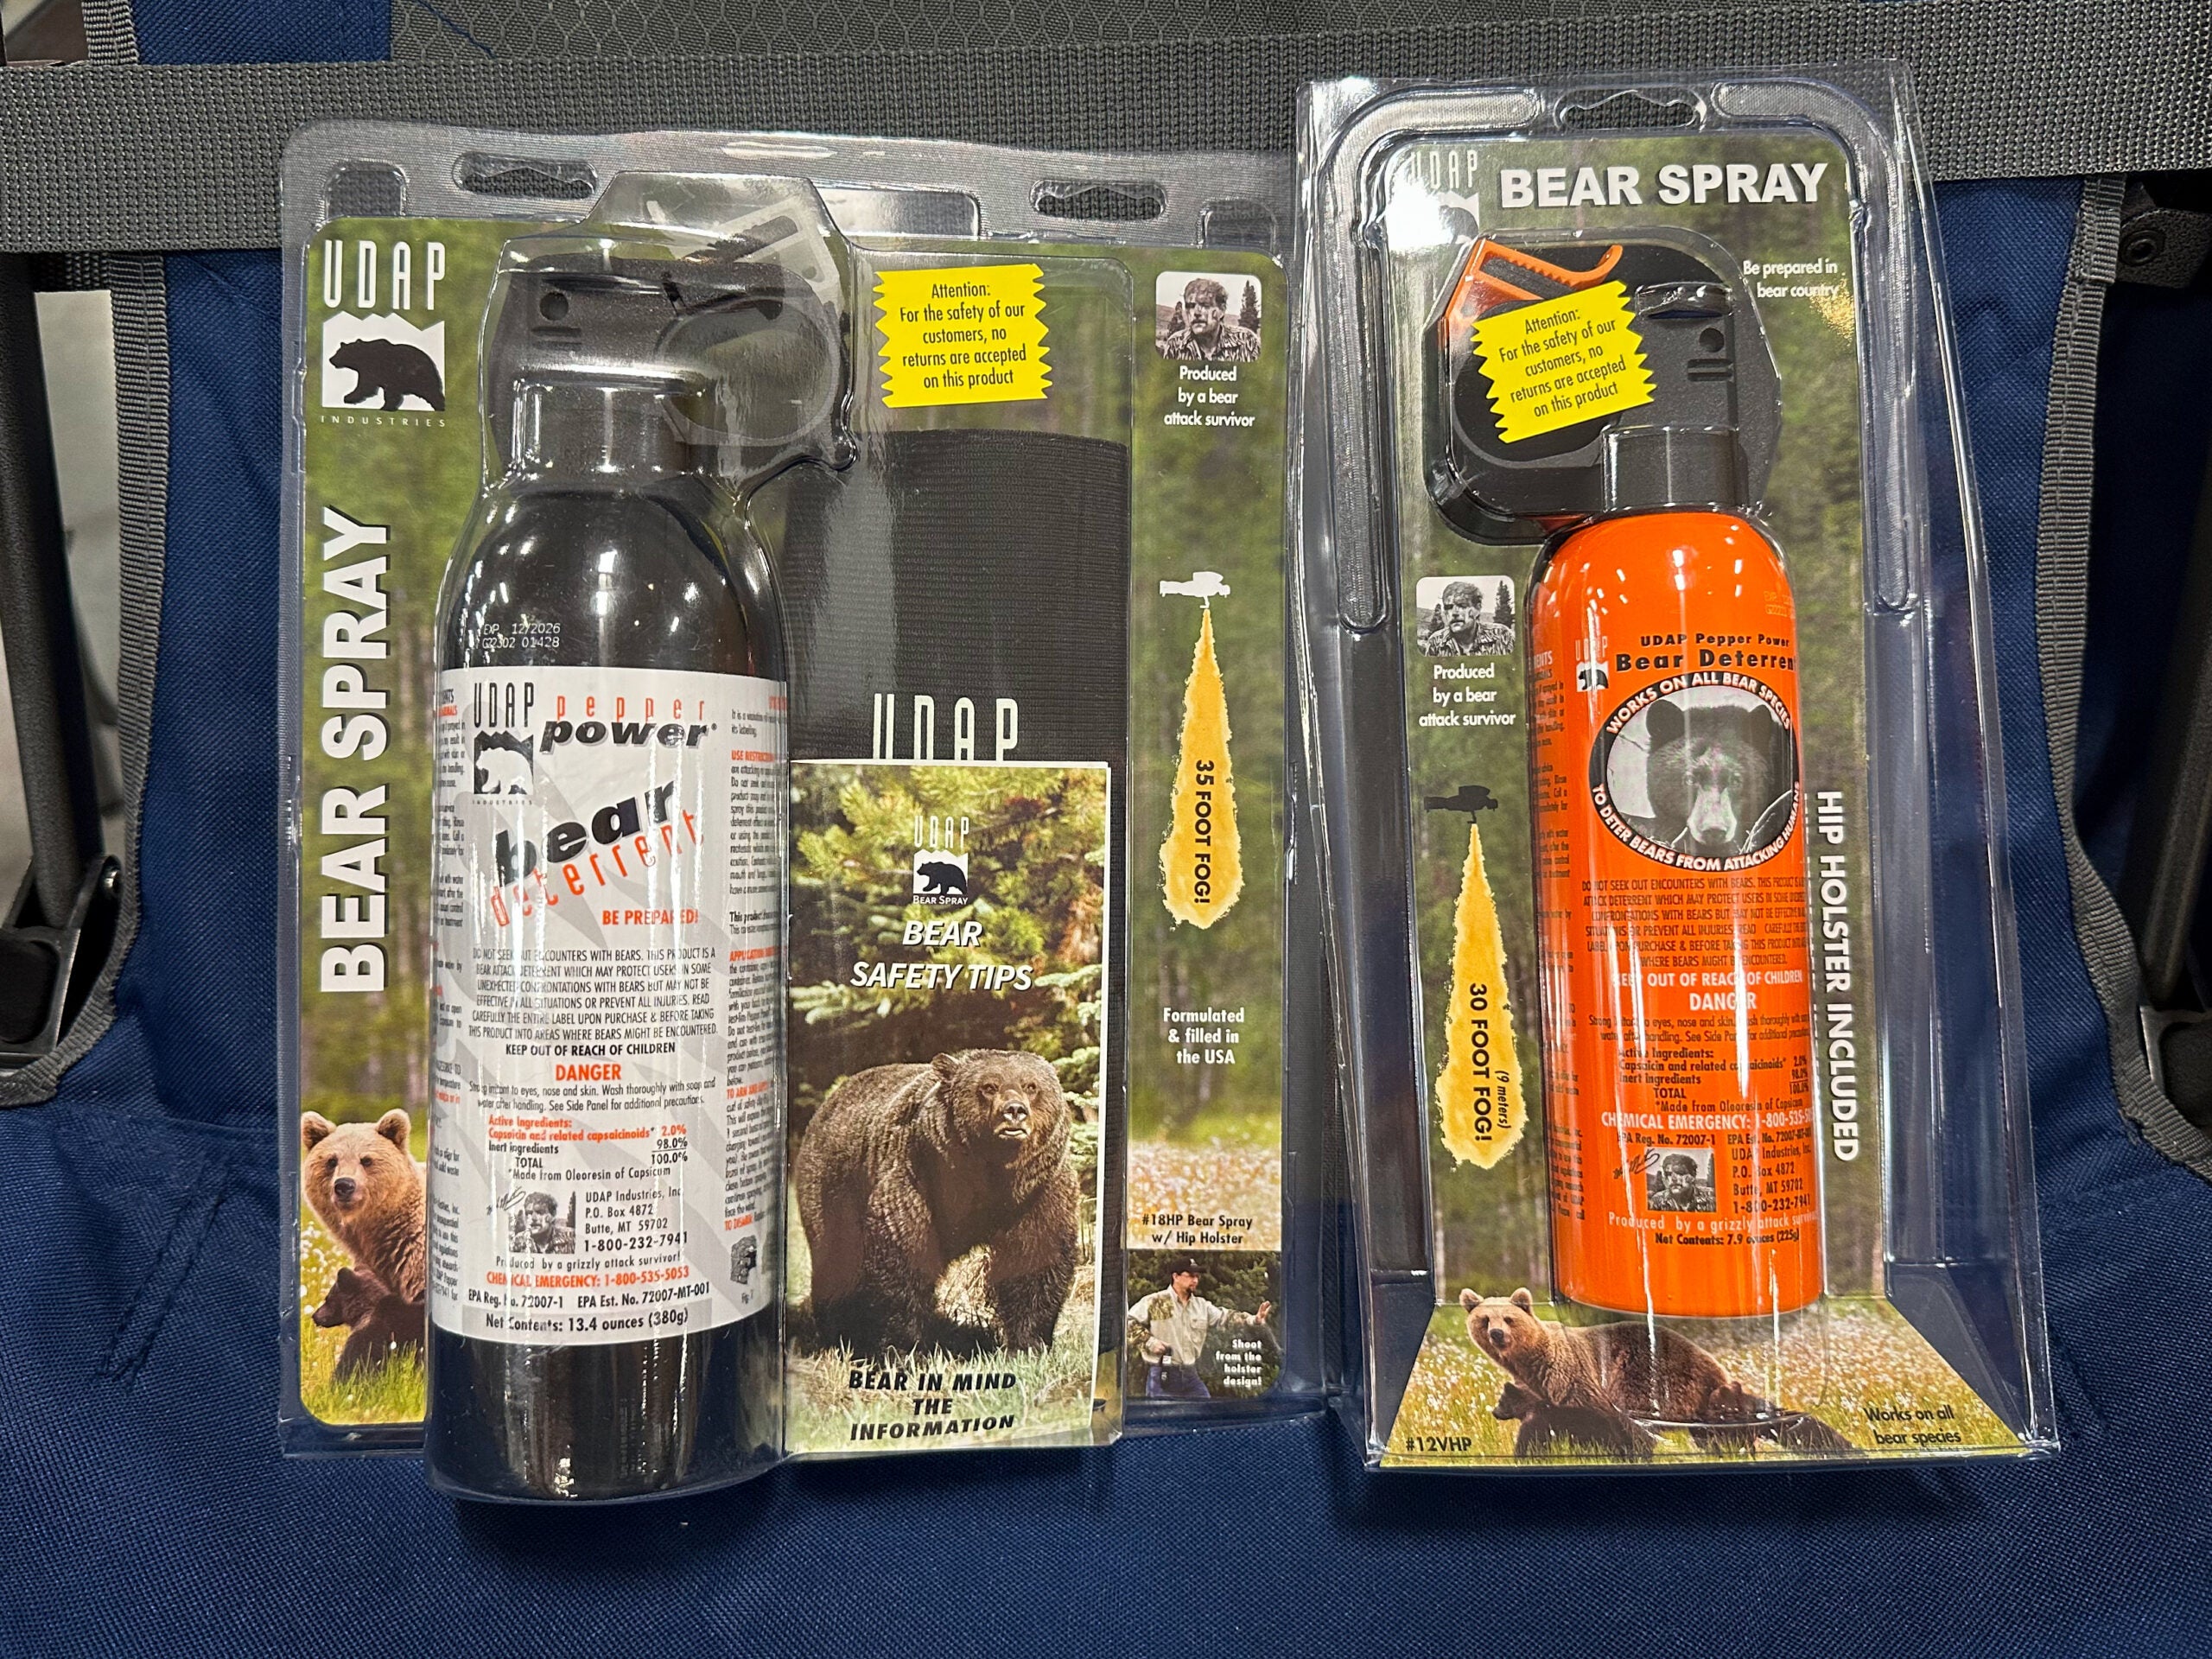 Packages of bear spray on a table